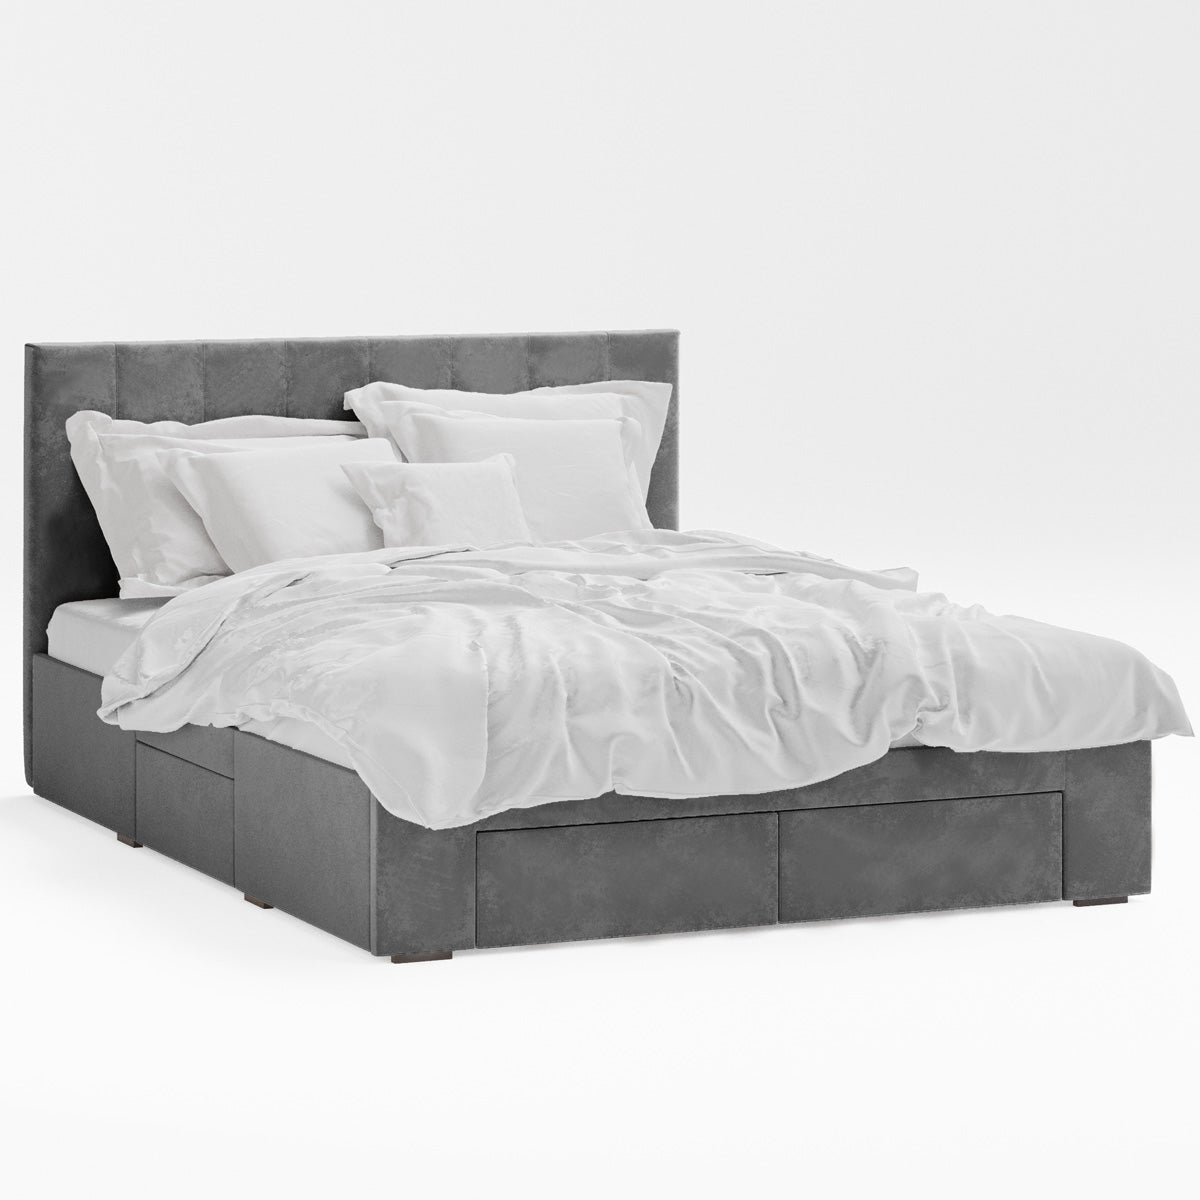 Ormond Storage Bed Frame with Four Extra Large Drawers (Fossil Grey Velvet)